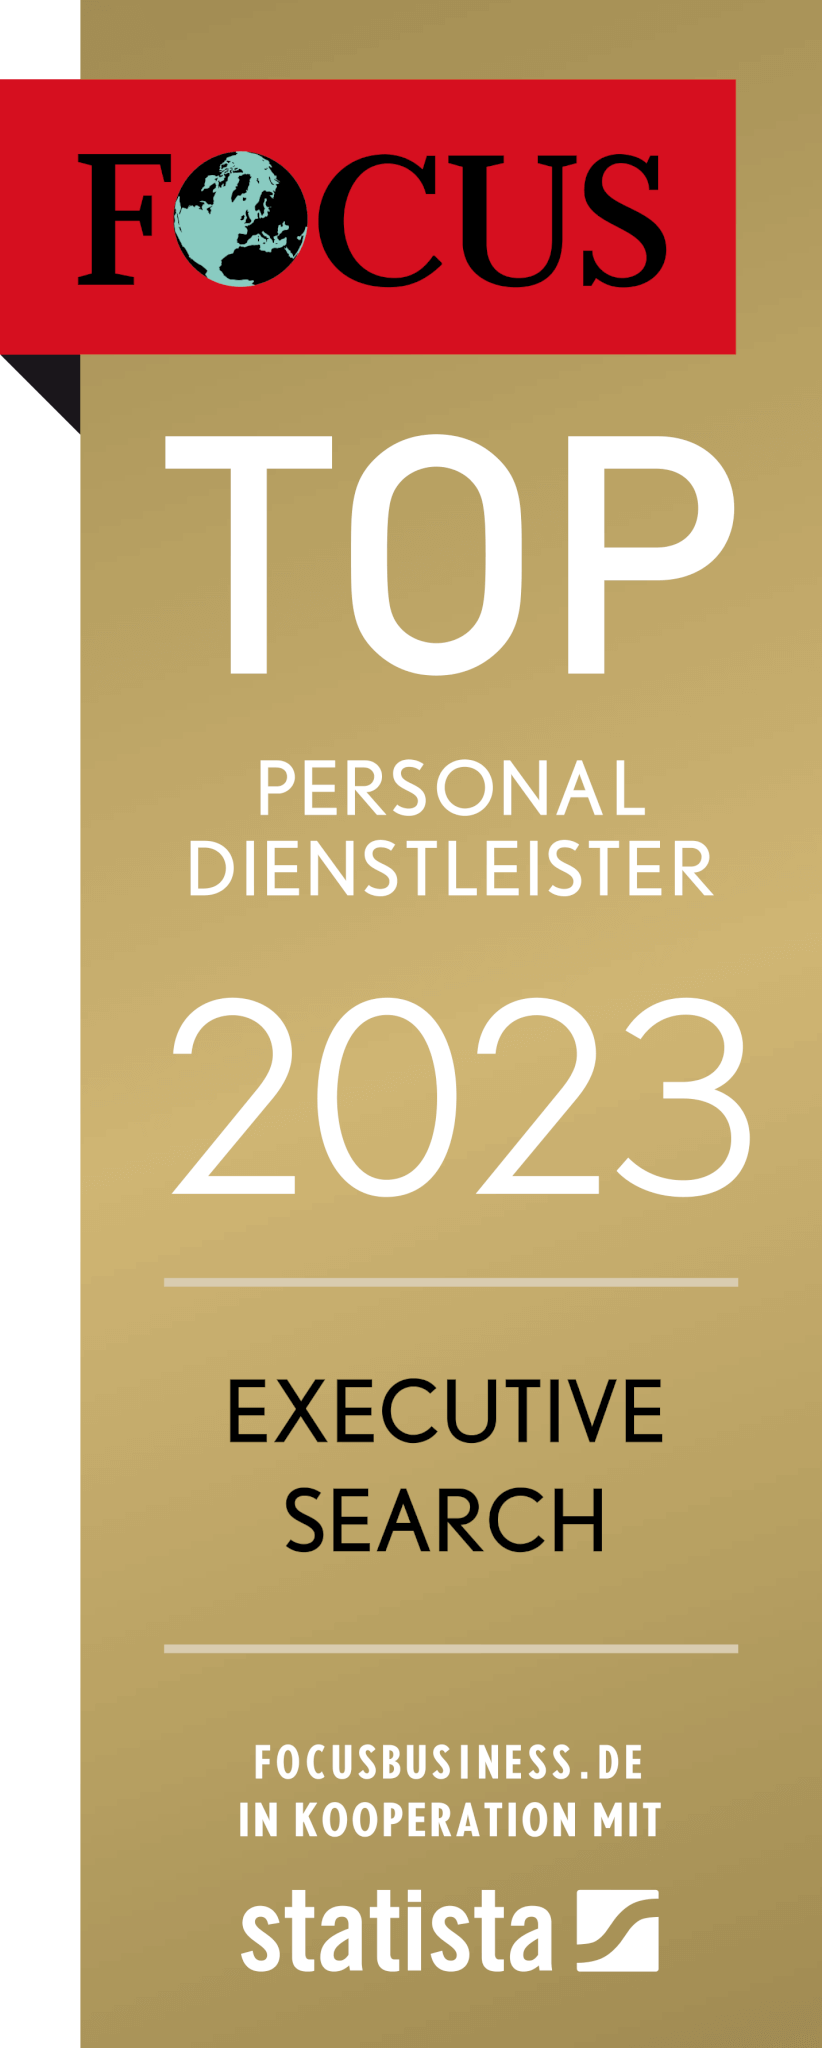 Focus_Top_Personnel Service Providers_2021_Executive Search